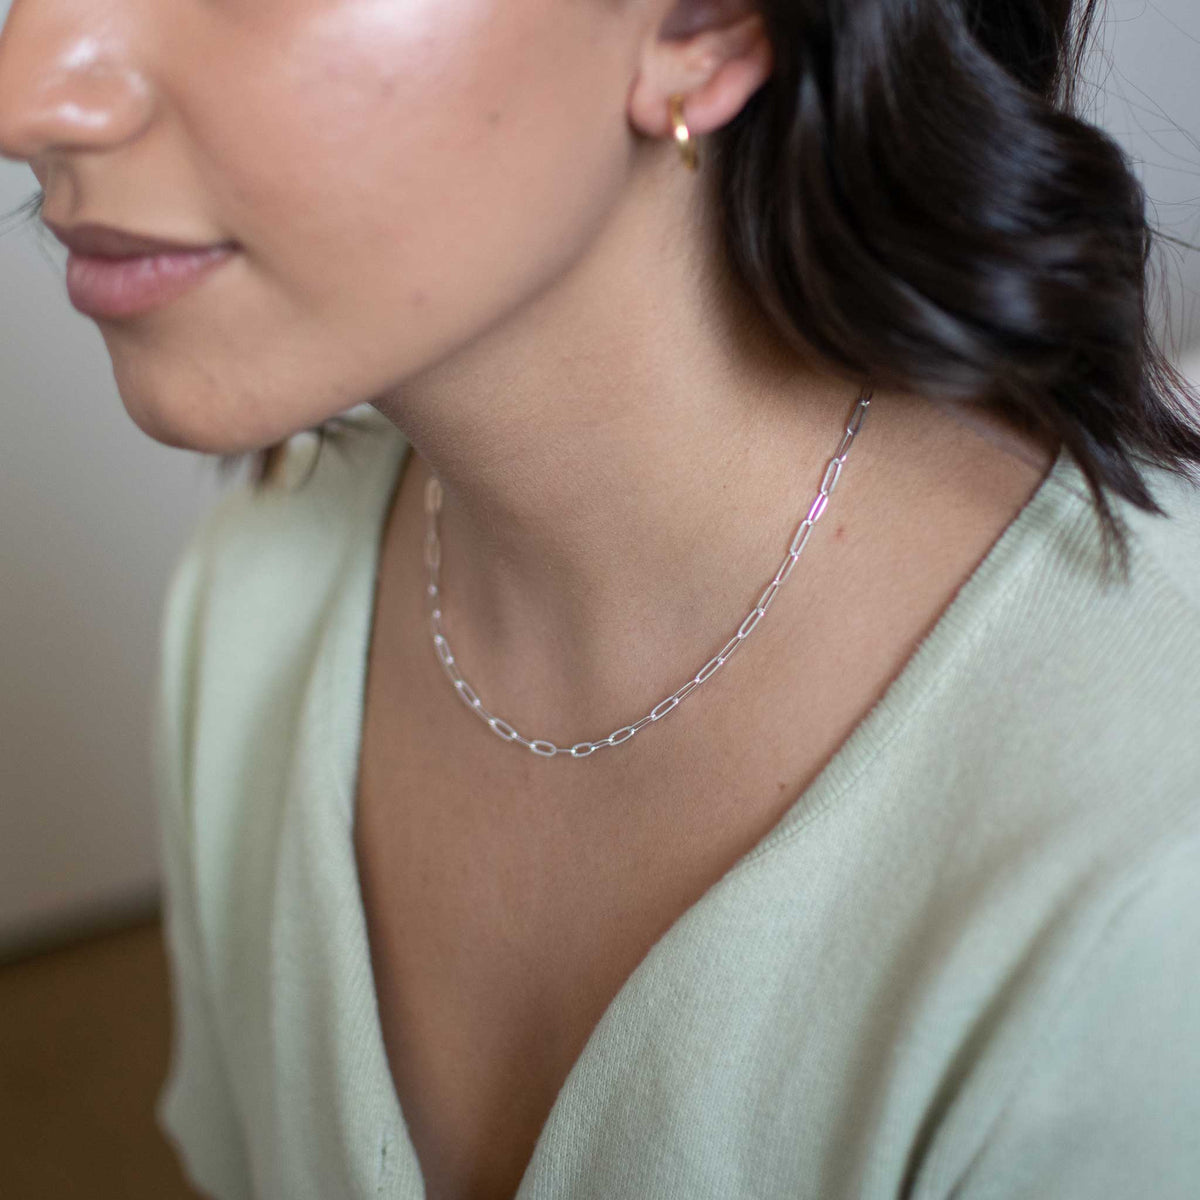 A left side view of the sterling silver chain necklace worn by model.